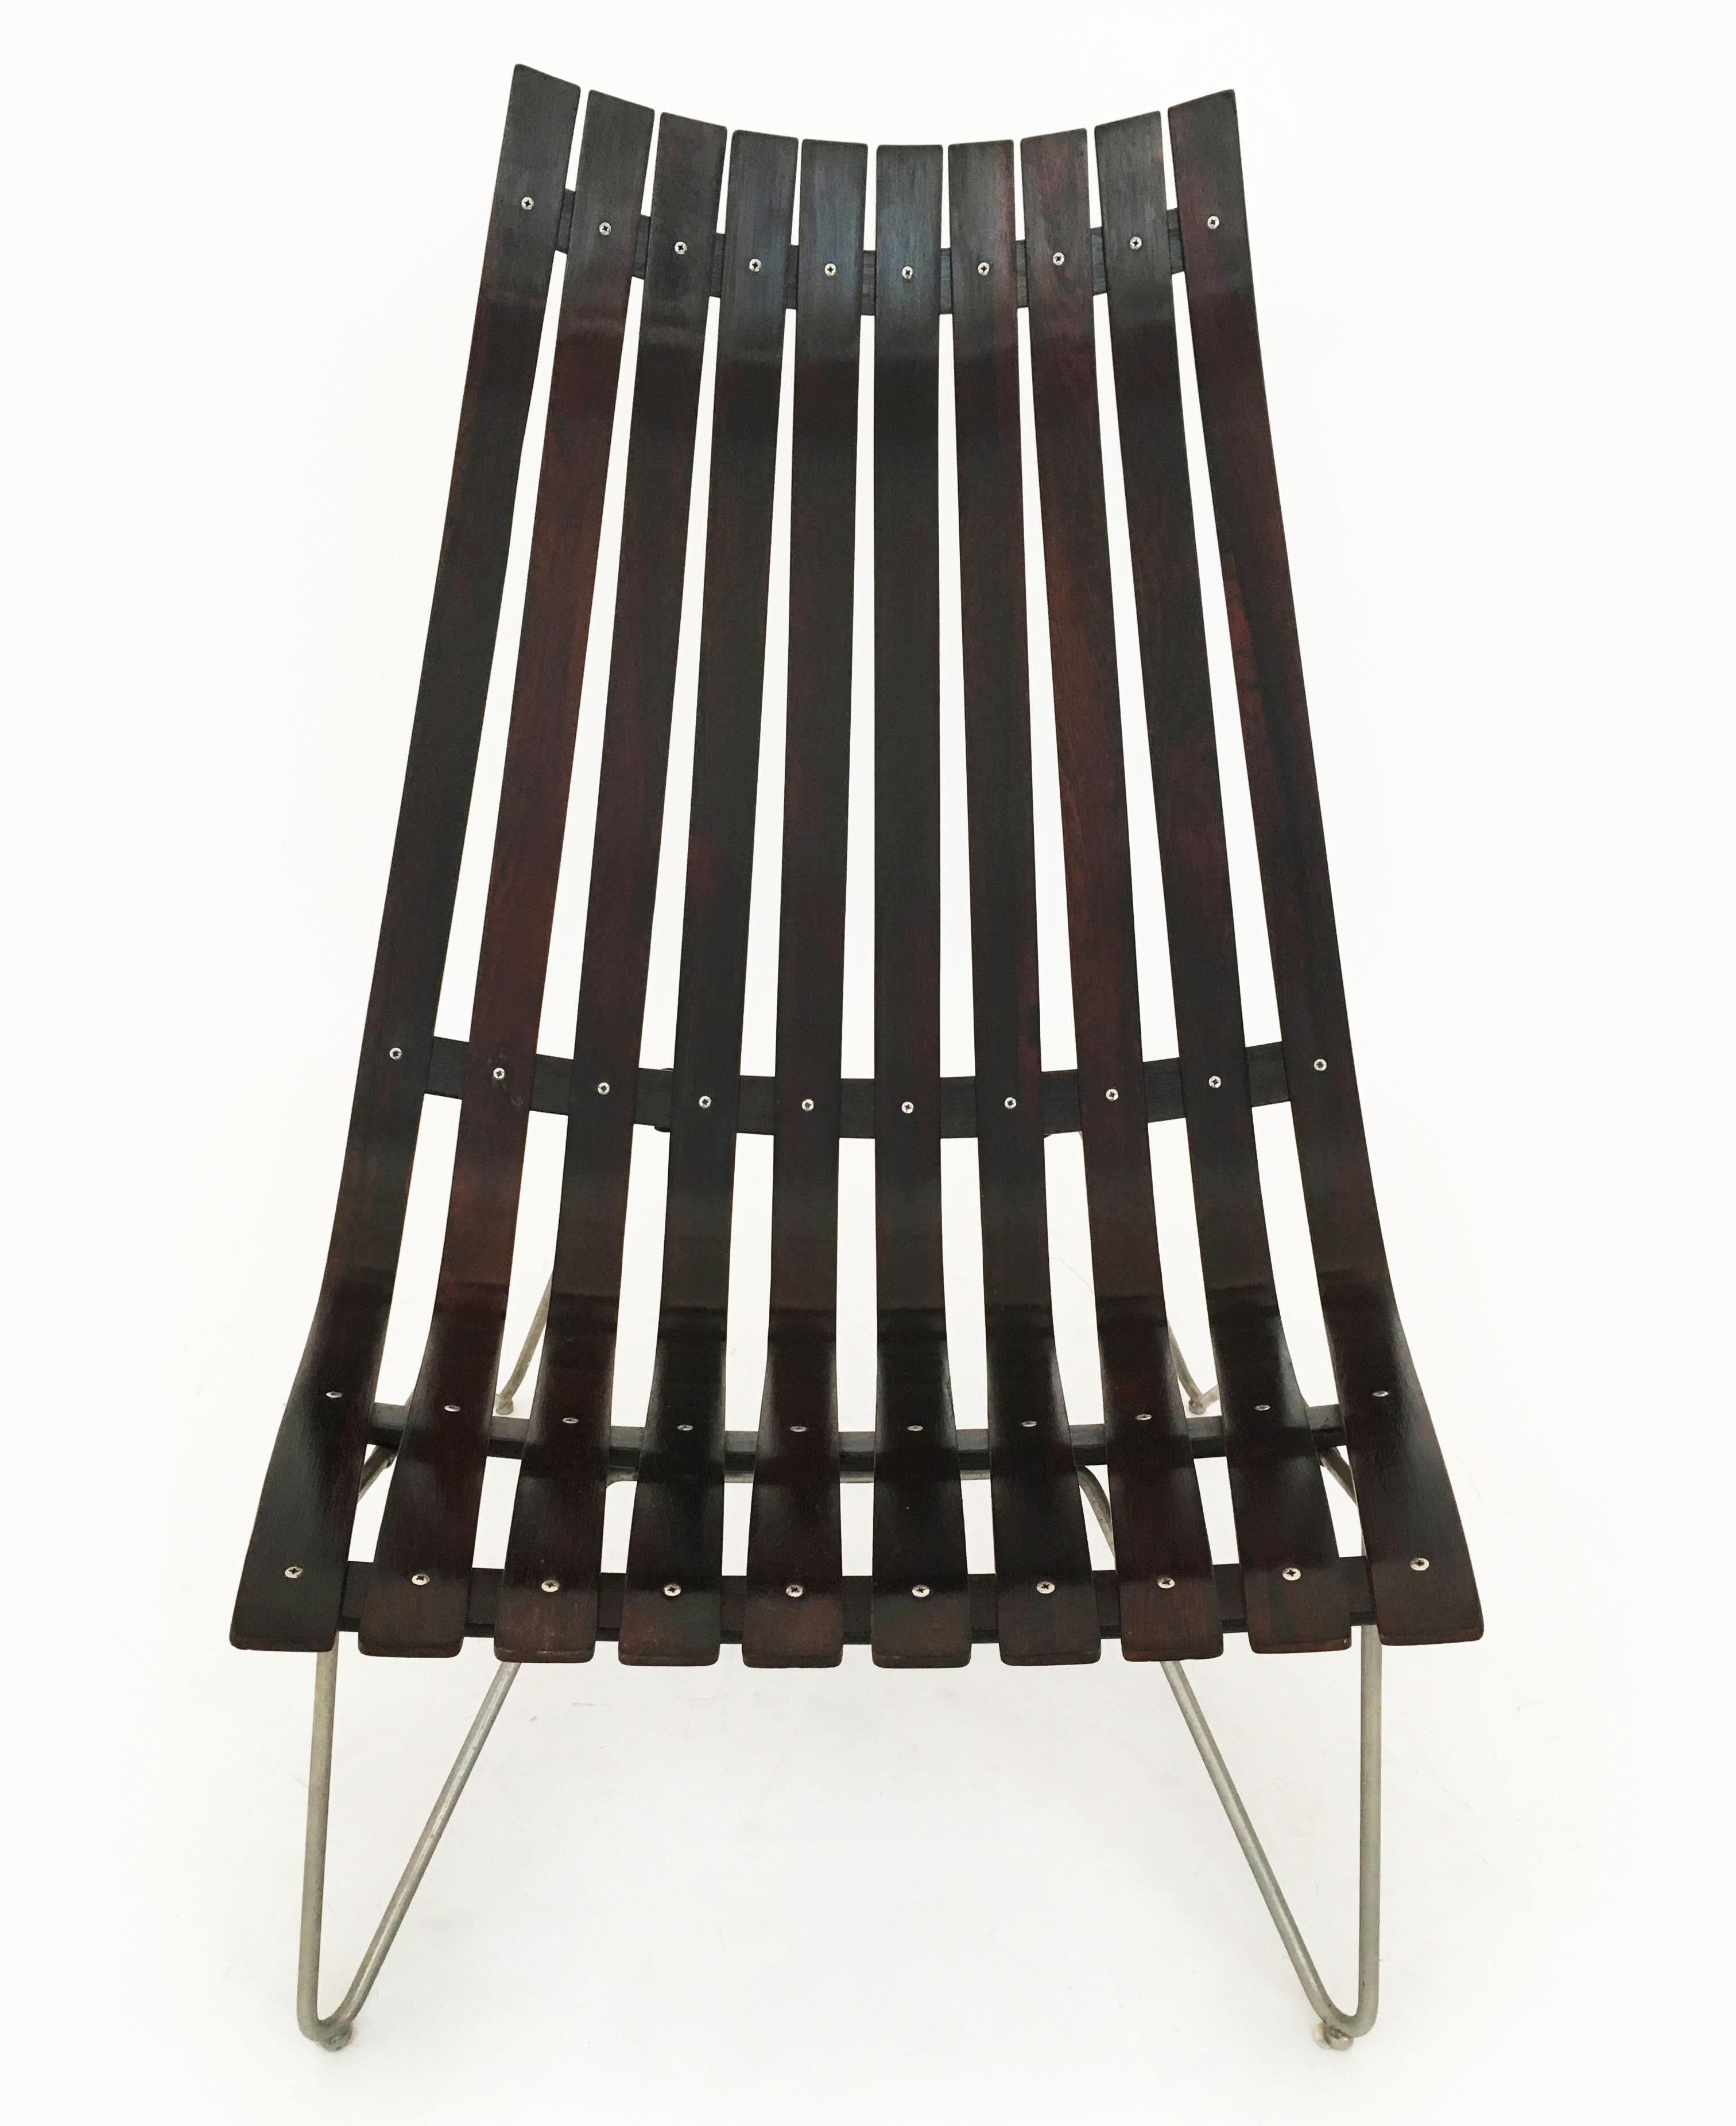 Norwegian Hans Brattrud Lounge Chair Model 'Scandia' by Hove Mobler, Norway 1950s For Sale